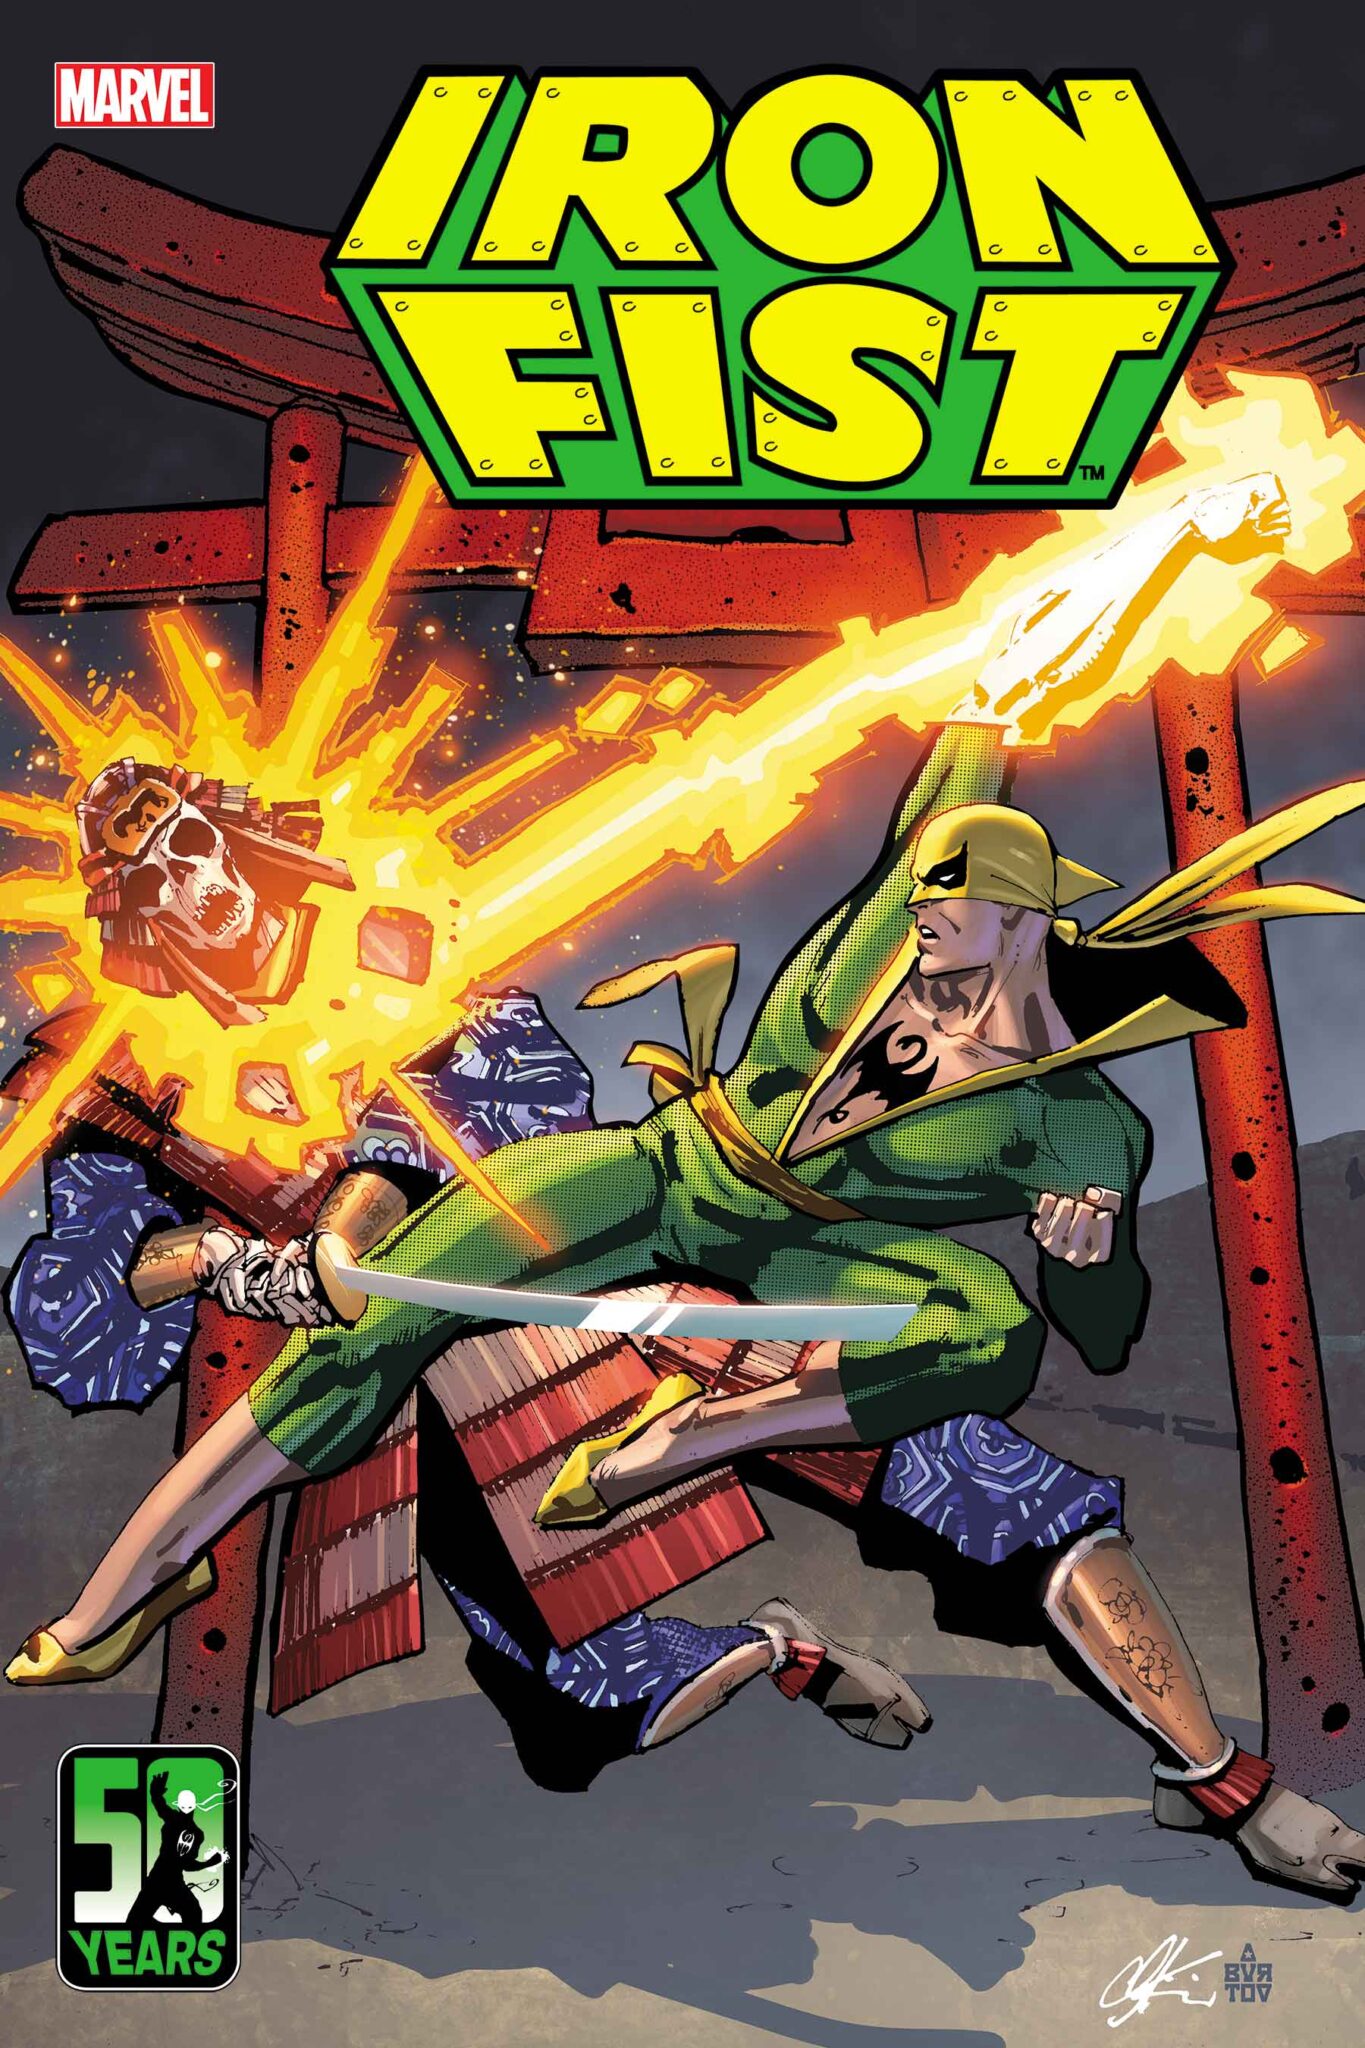 Iron Fist 50th Anniversary Special Hidden Gem Variant Cover by HOWARD CHAYKIN